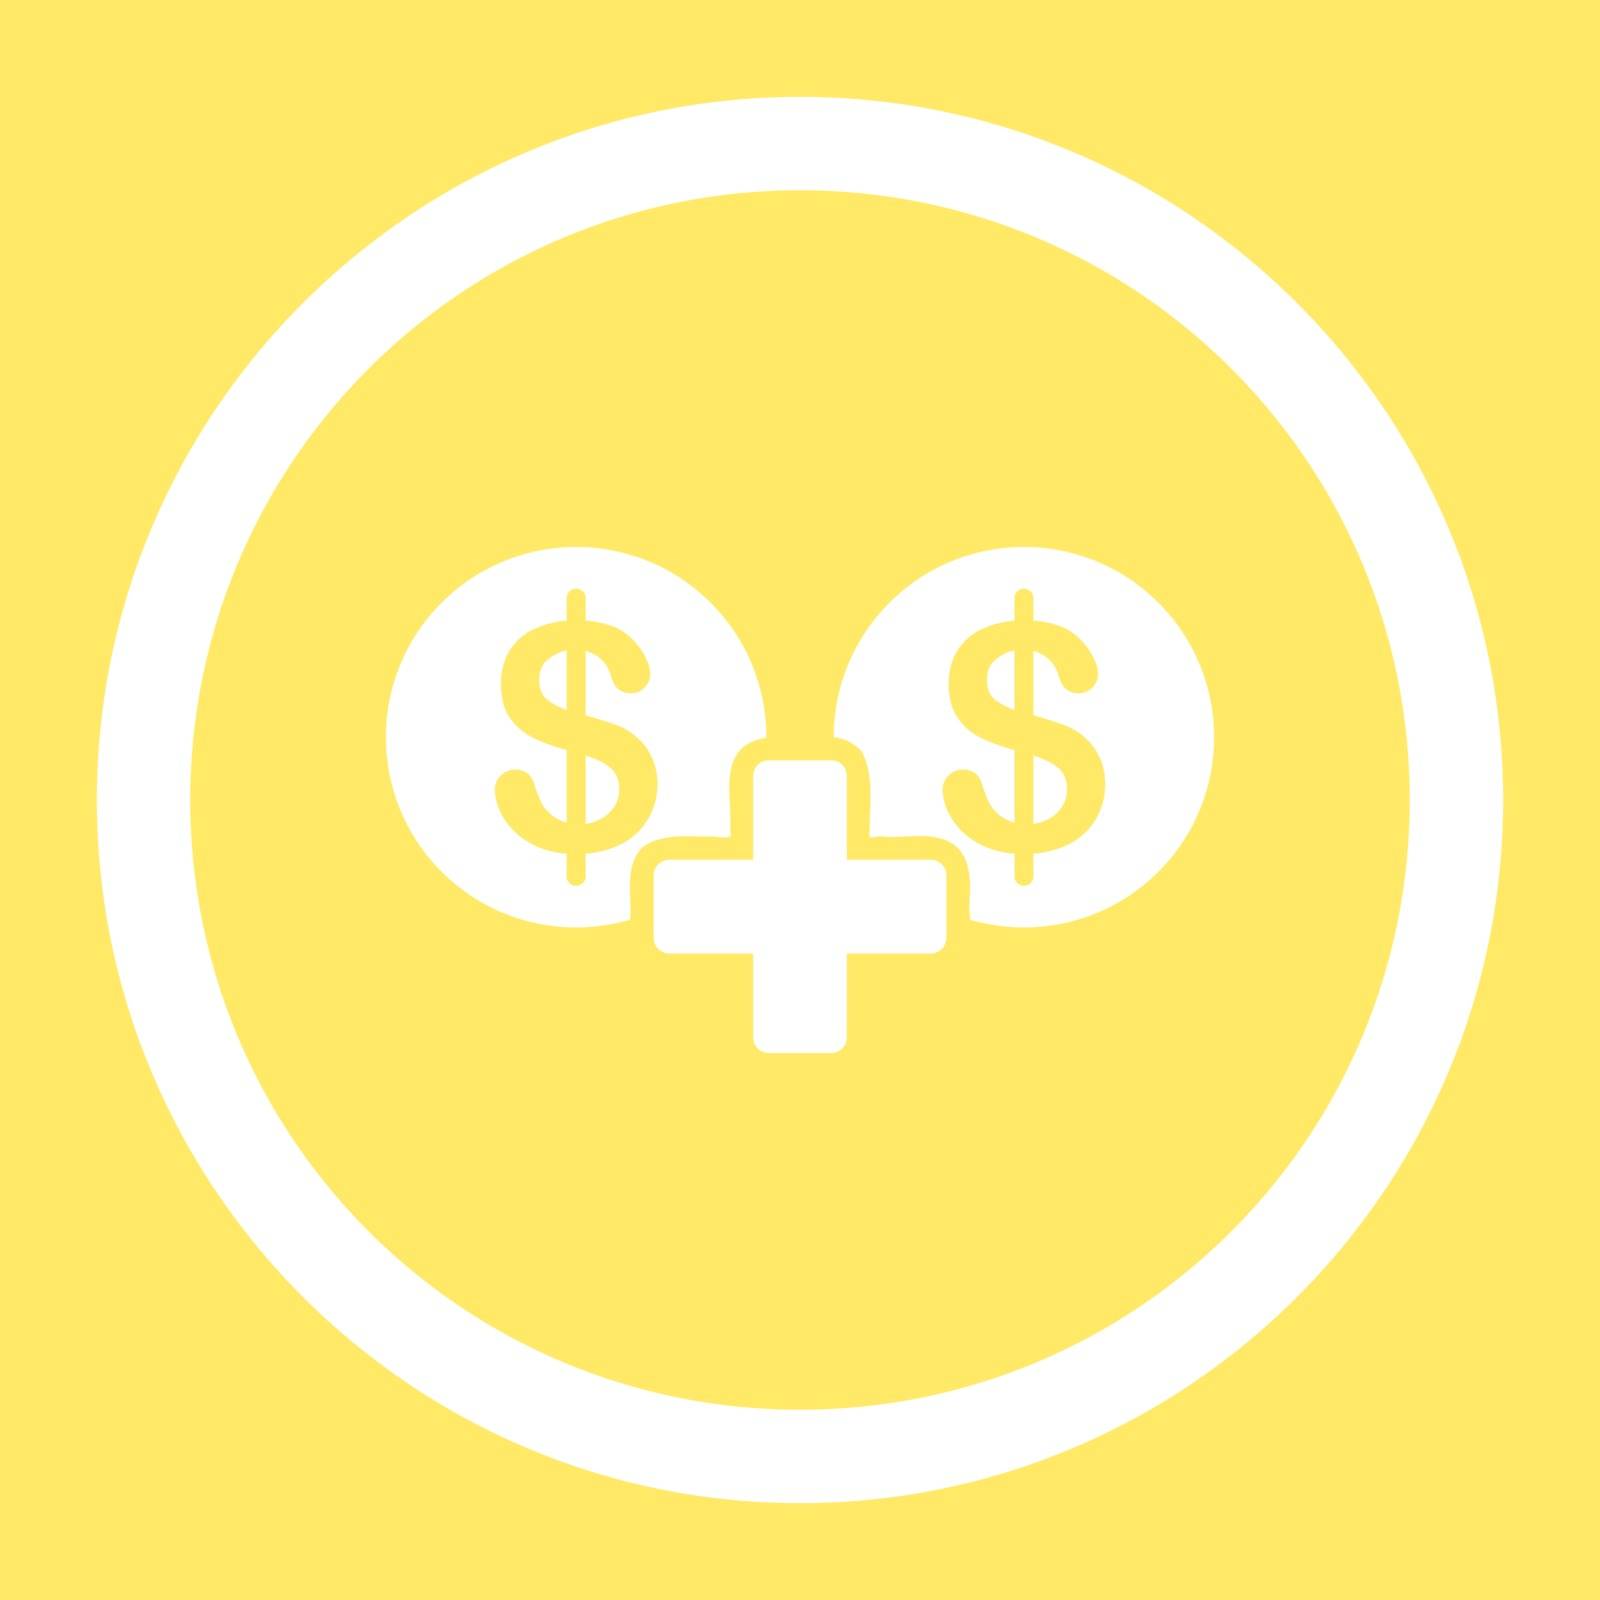 Sum vector icon. This flat rounded symbol uses white color and isolated on a yellow background.